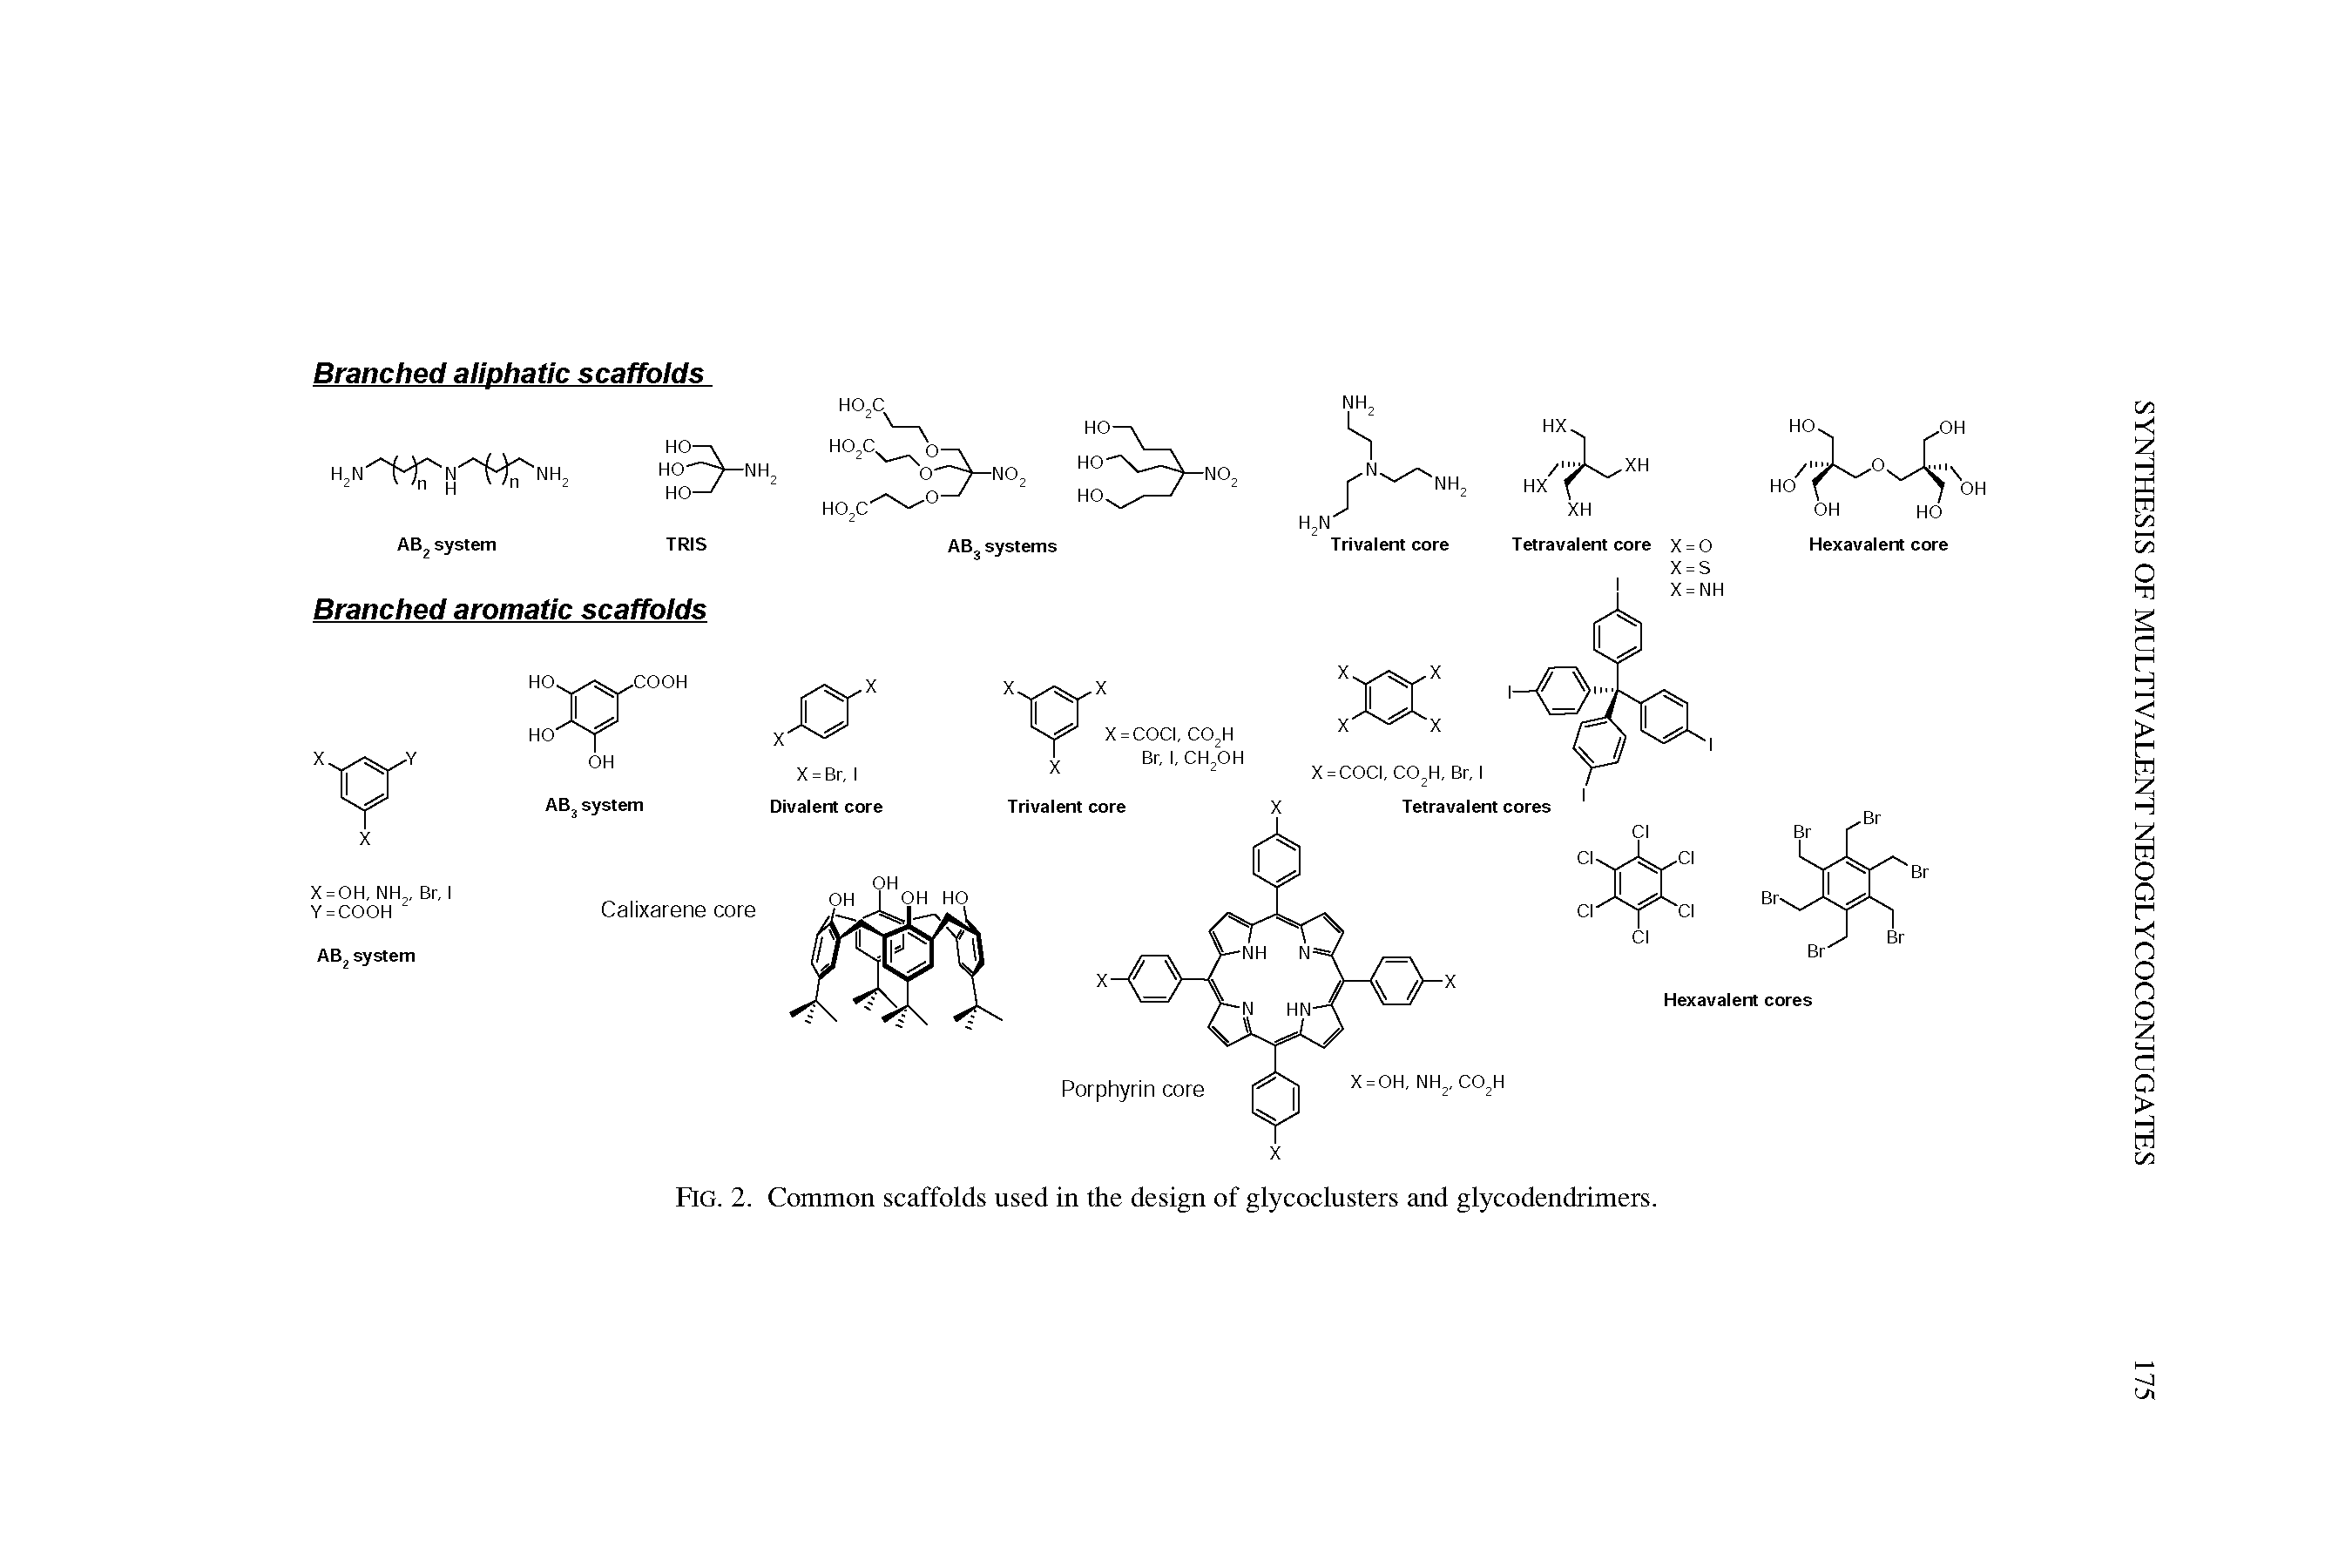 Fig. 2. Common scaffolds used in the design of glycoclusters and glycodendrimers.